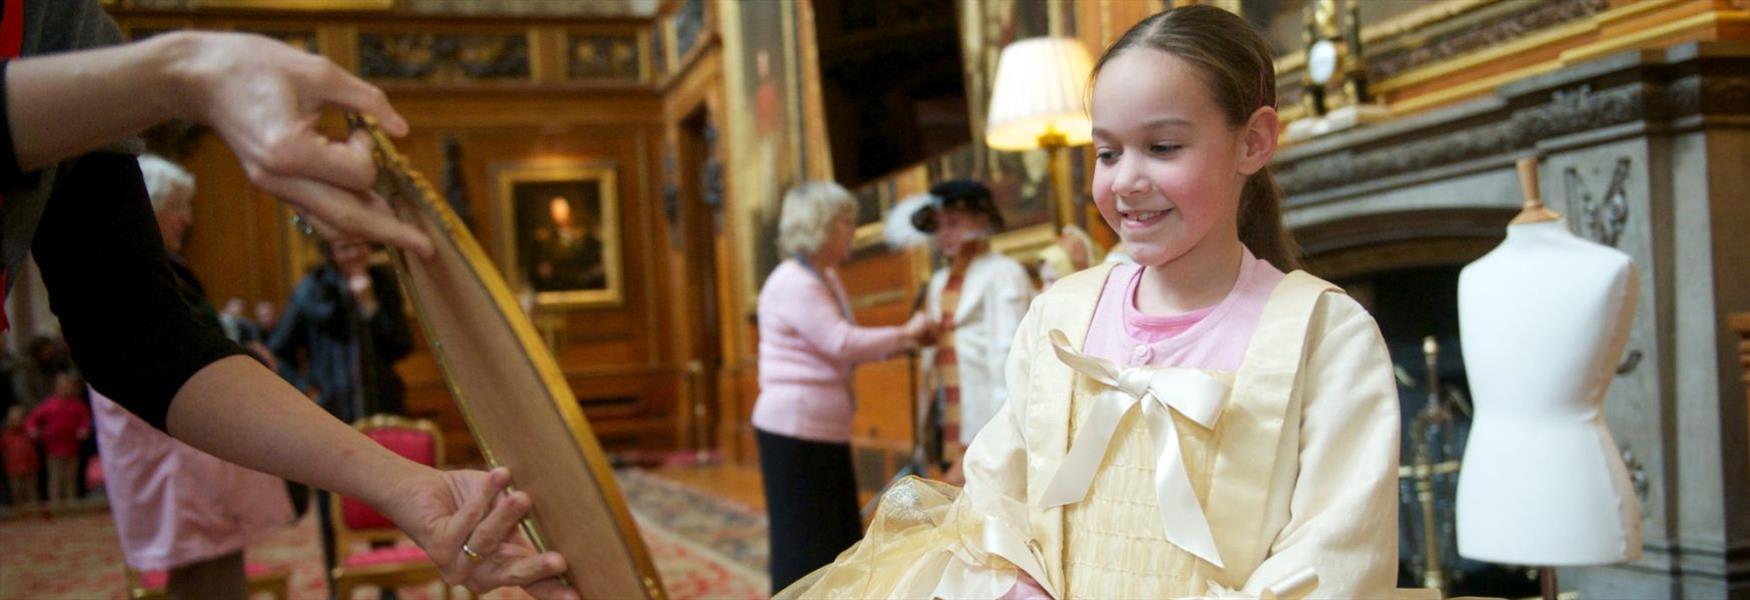 Enjoy Family Activities at Windsor Castle